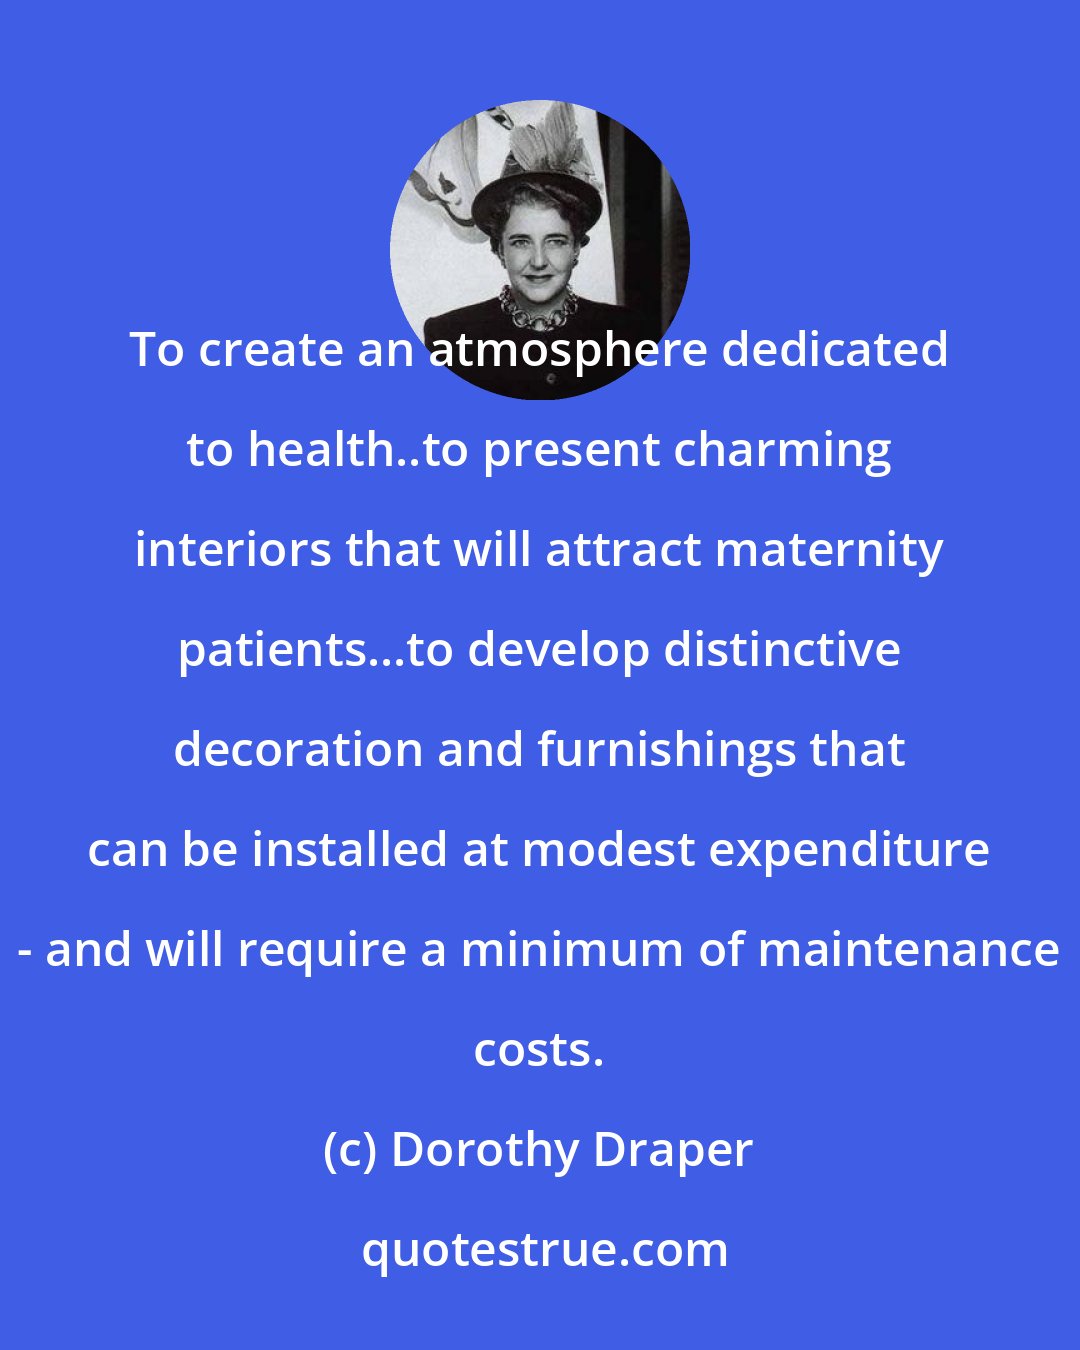 Dorothy Draper: To create an atmosphere dedicated to health..to present charming interiors that will attract maternity patients...to develop distinctive decoration and furnishings that can be installed at modest expenditure - and will require a minimum of maintenance costs.